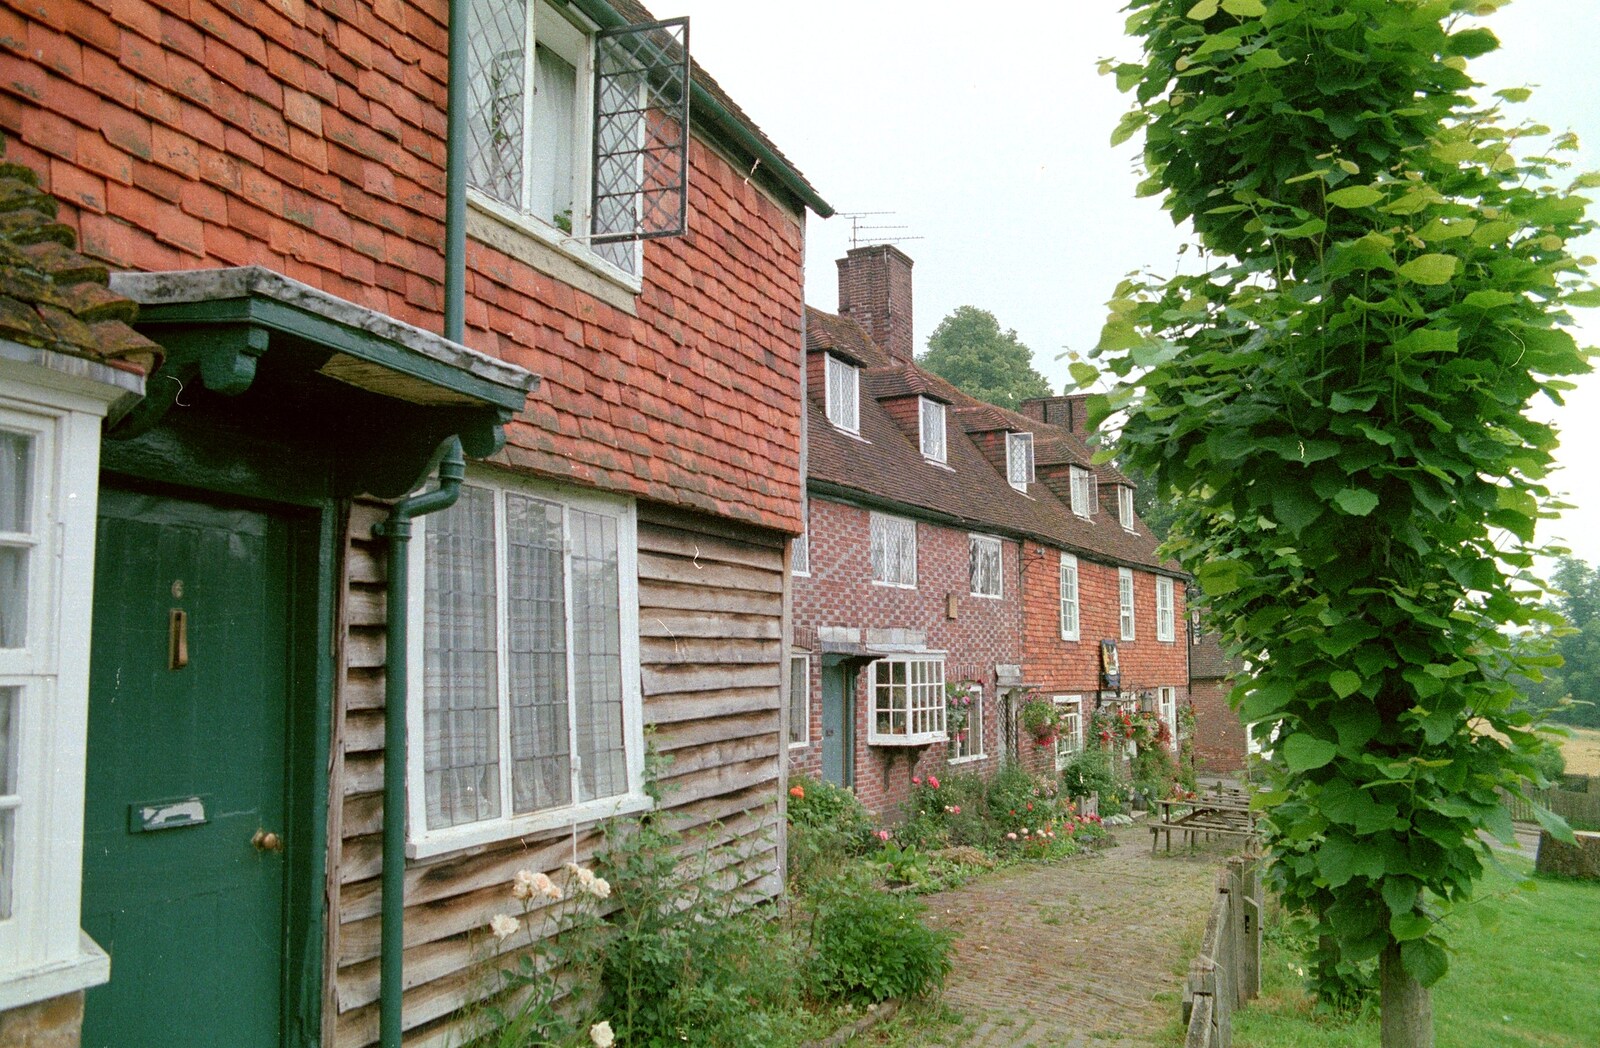 Cute Kent cottages from A Trip to Groombridge, Kent - 10th July 1986